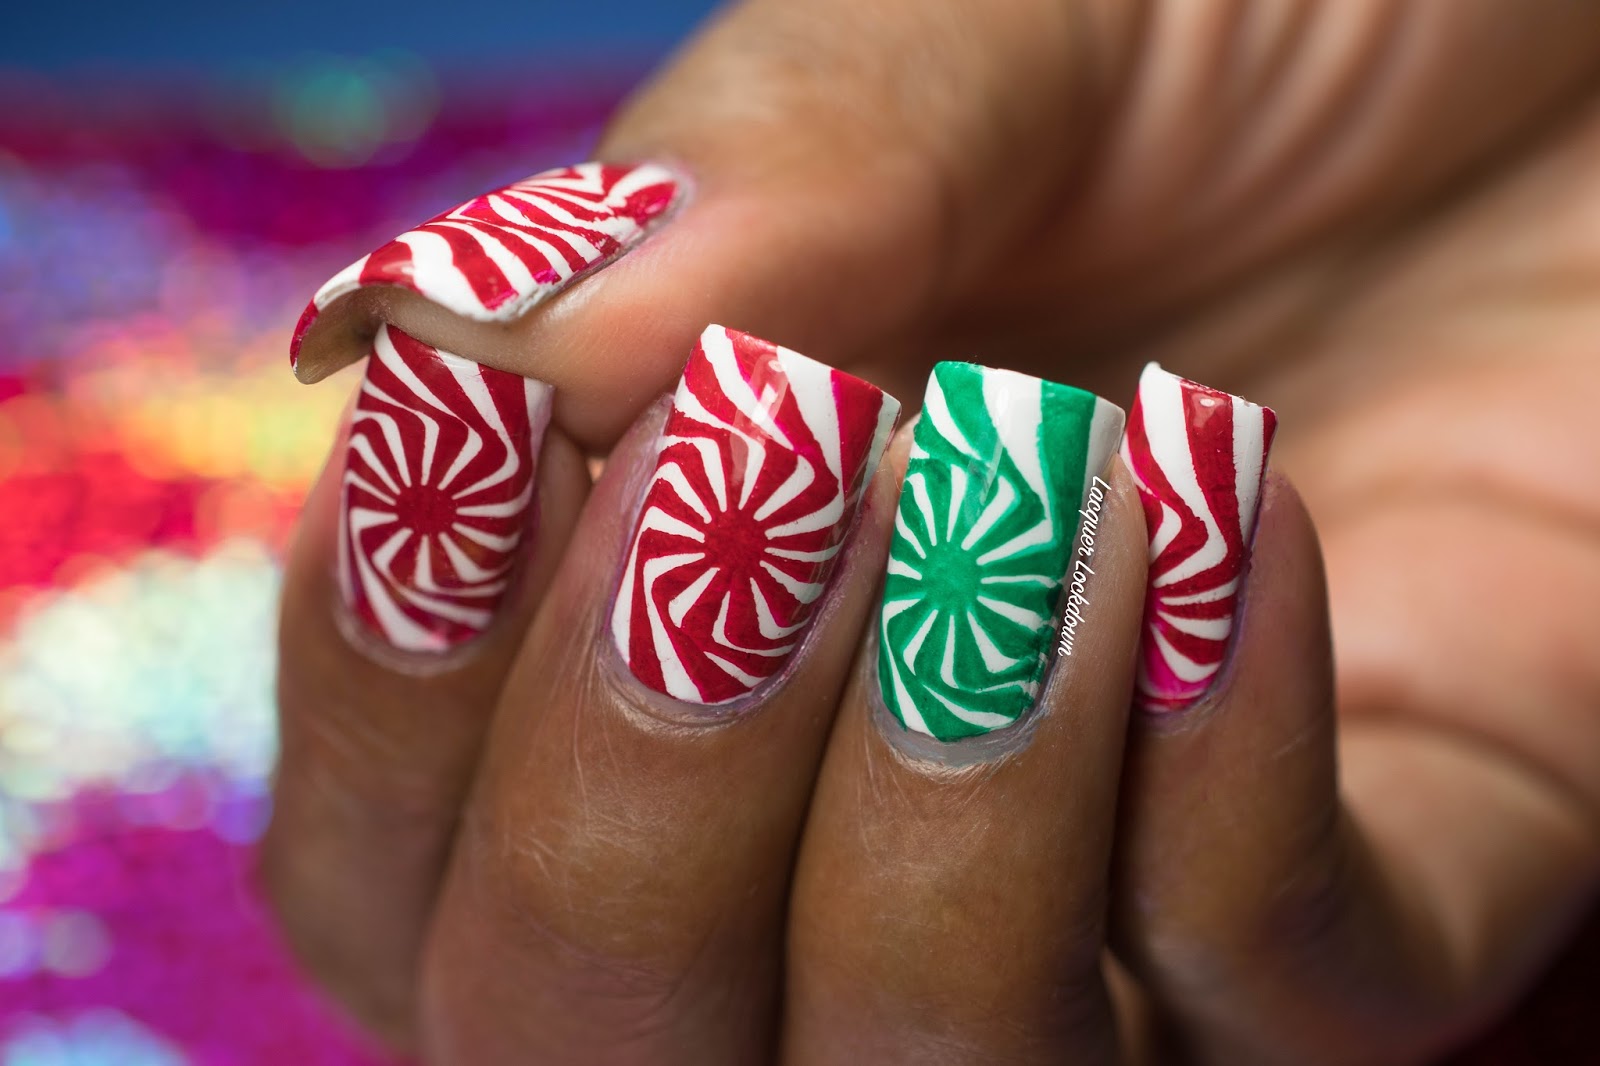 6. Red and White Candy Cane Nail Art on Pinterest - wide 4